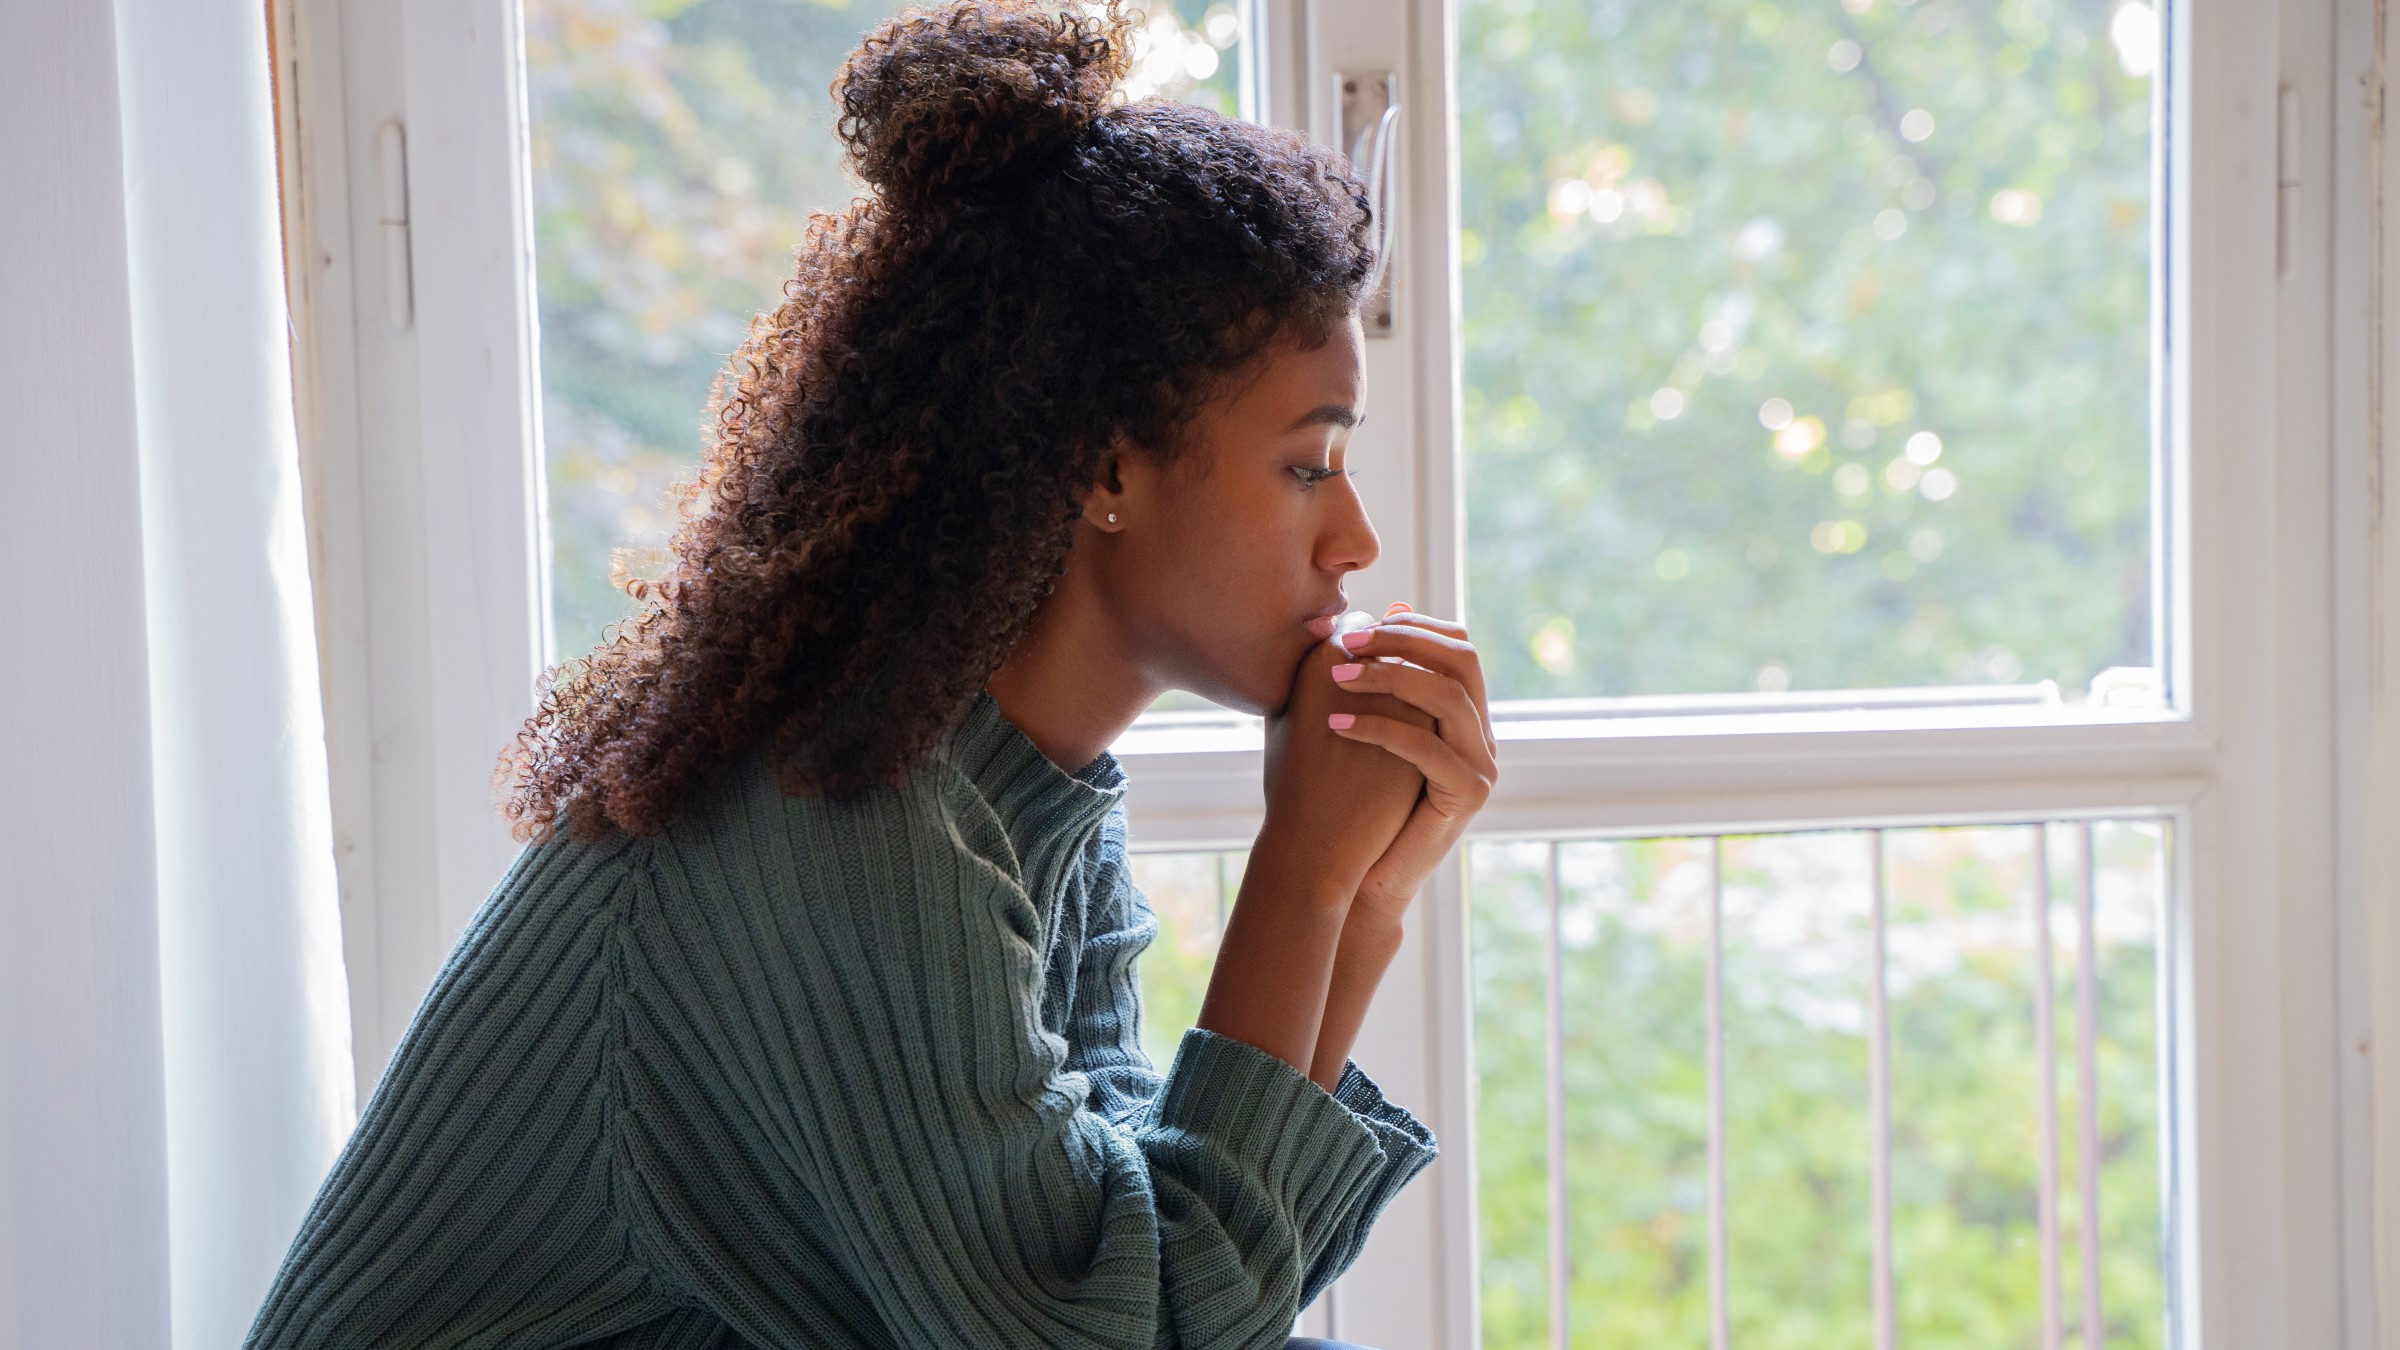 Young woman in a green sweater with curly hair sitting at a window looking depressed.
tommaso79/iStock via Getty Images